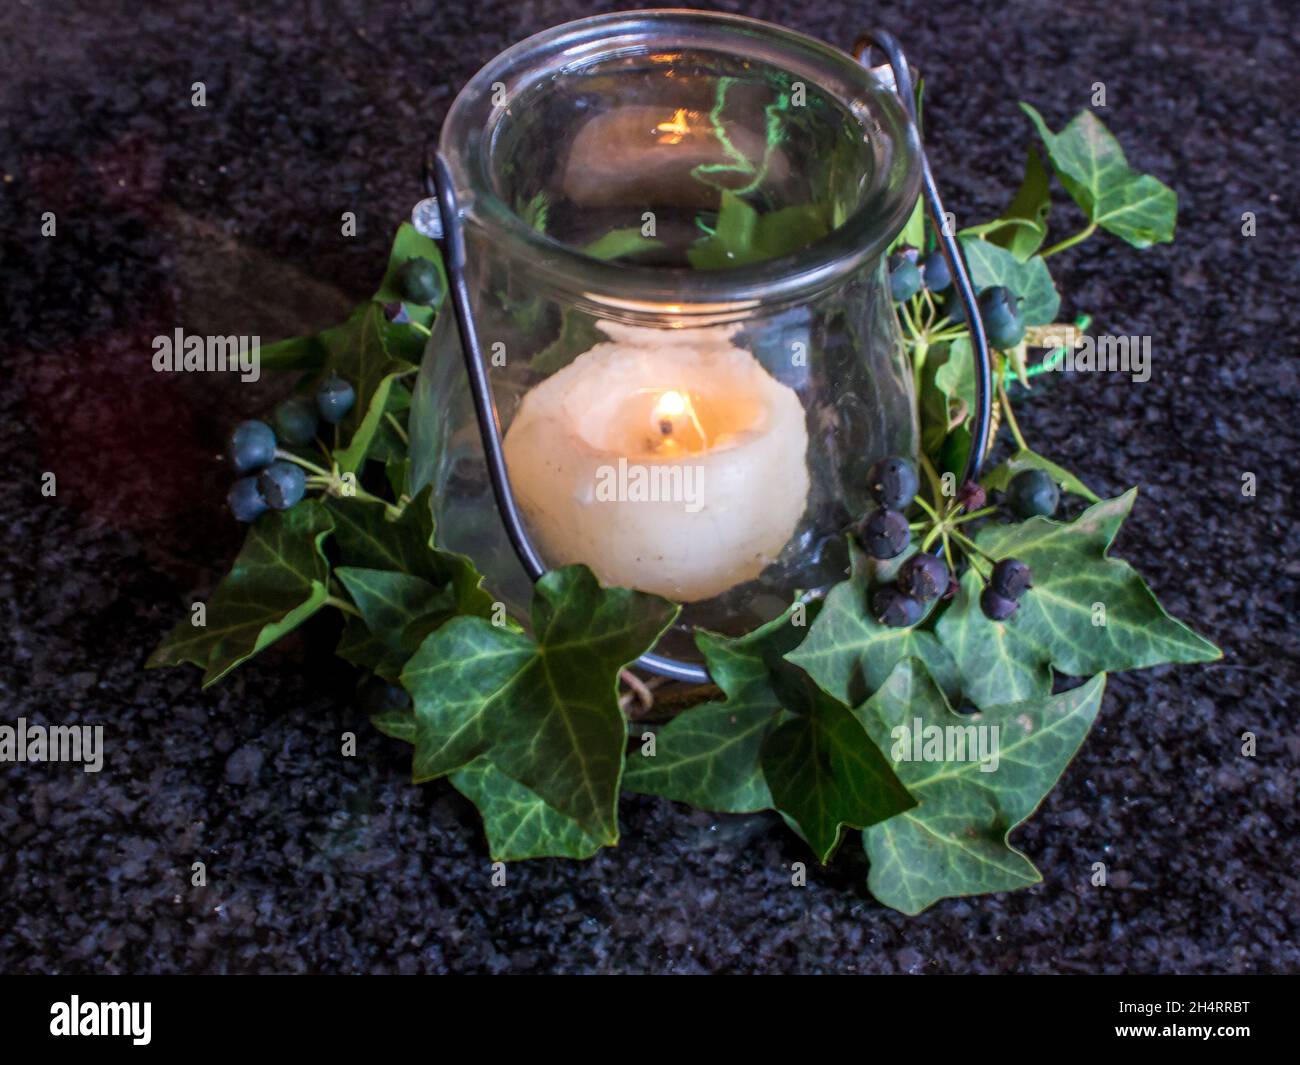 A small table decoration, consisting of a burning Candle of a burning candle surrounded by Ivy leaves and berries, against a dark background Stock Photo